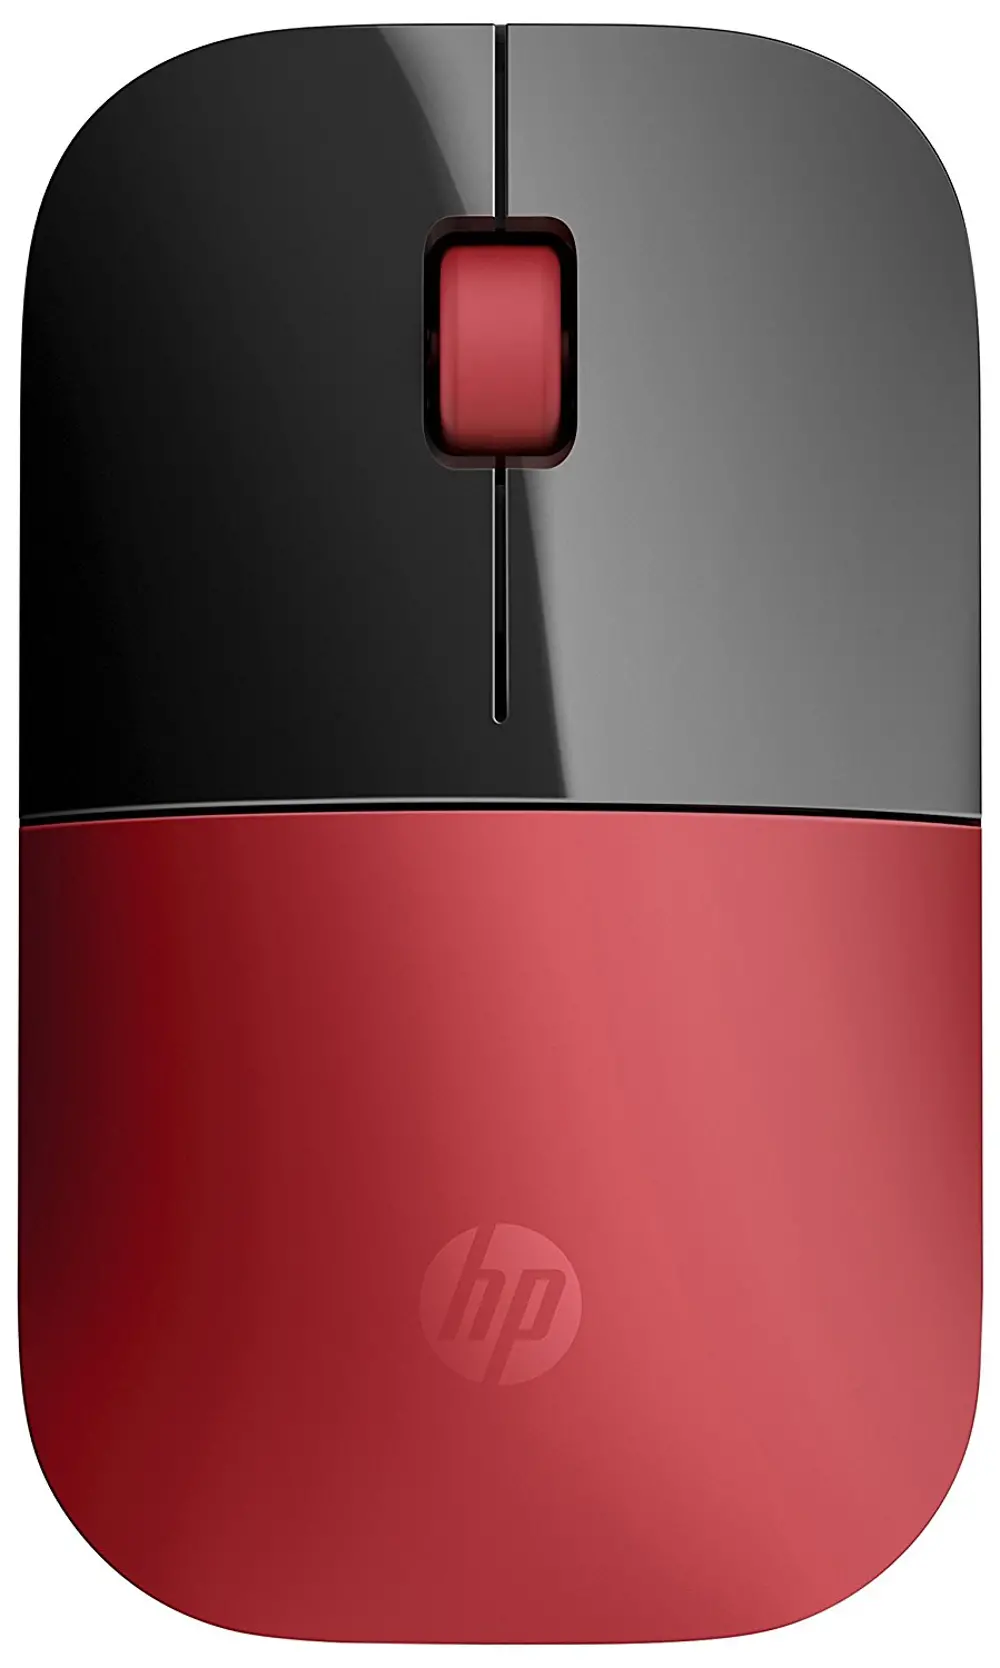 HP-Z3700,MOUSE,RED HP Wireless Mouse Z3700 - Red-1